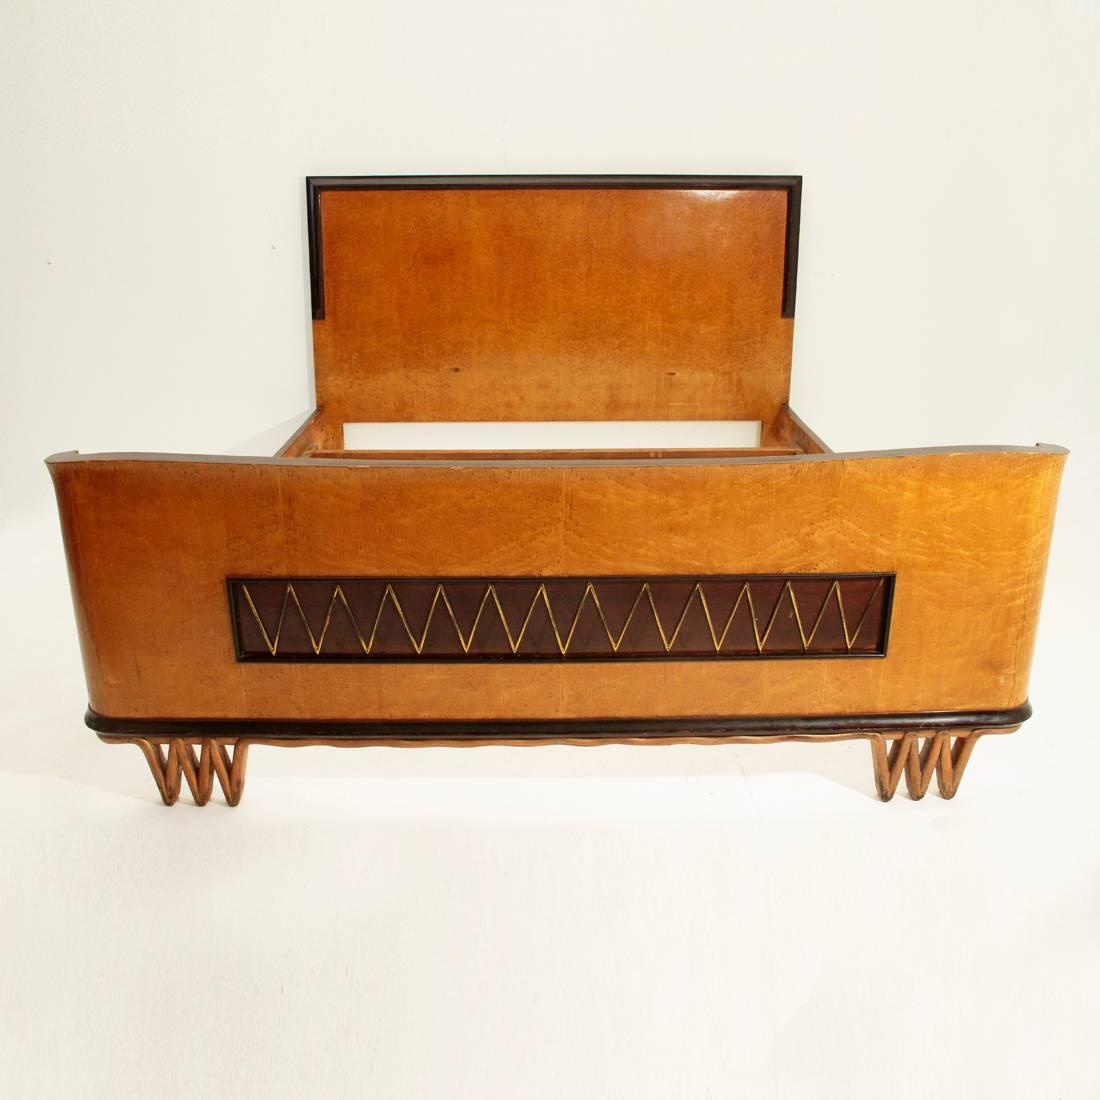 Beautiful Italian bed of the 1940s.
Wooden structure in different essences.
Footboard with brass inserts and copper-colored wooden feet.
Good general condition, some signs and veneer deficiencies due to normal use over time.

Dimensions: Width